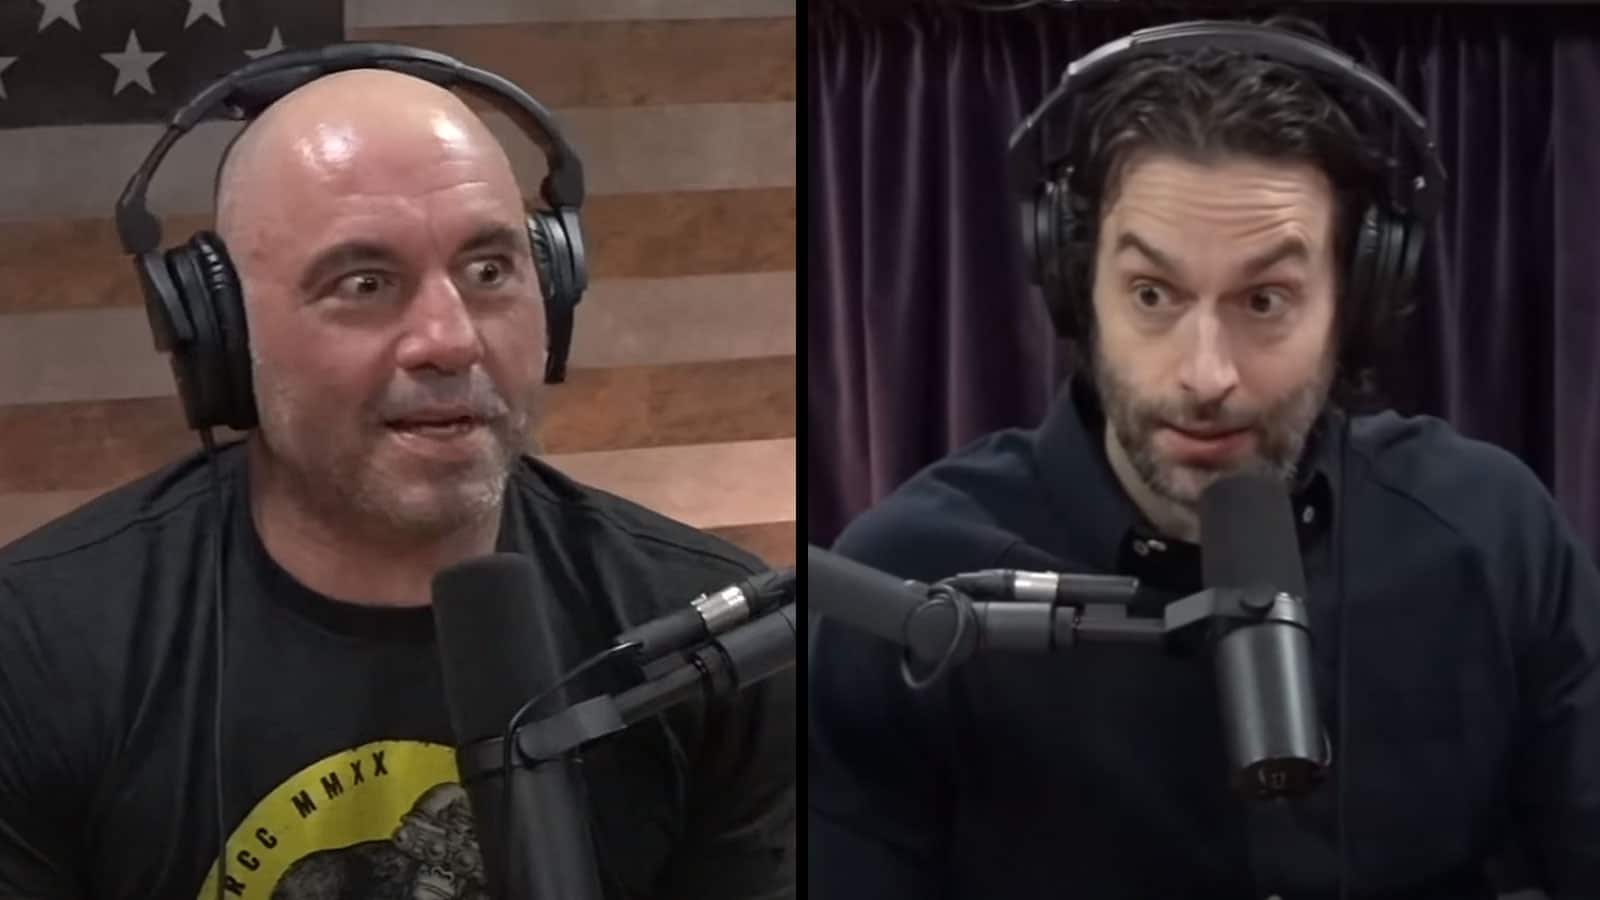 Spotify Removes Controversial Episodes of 'The Joe Rogan Experience'